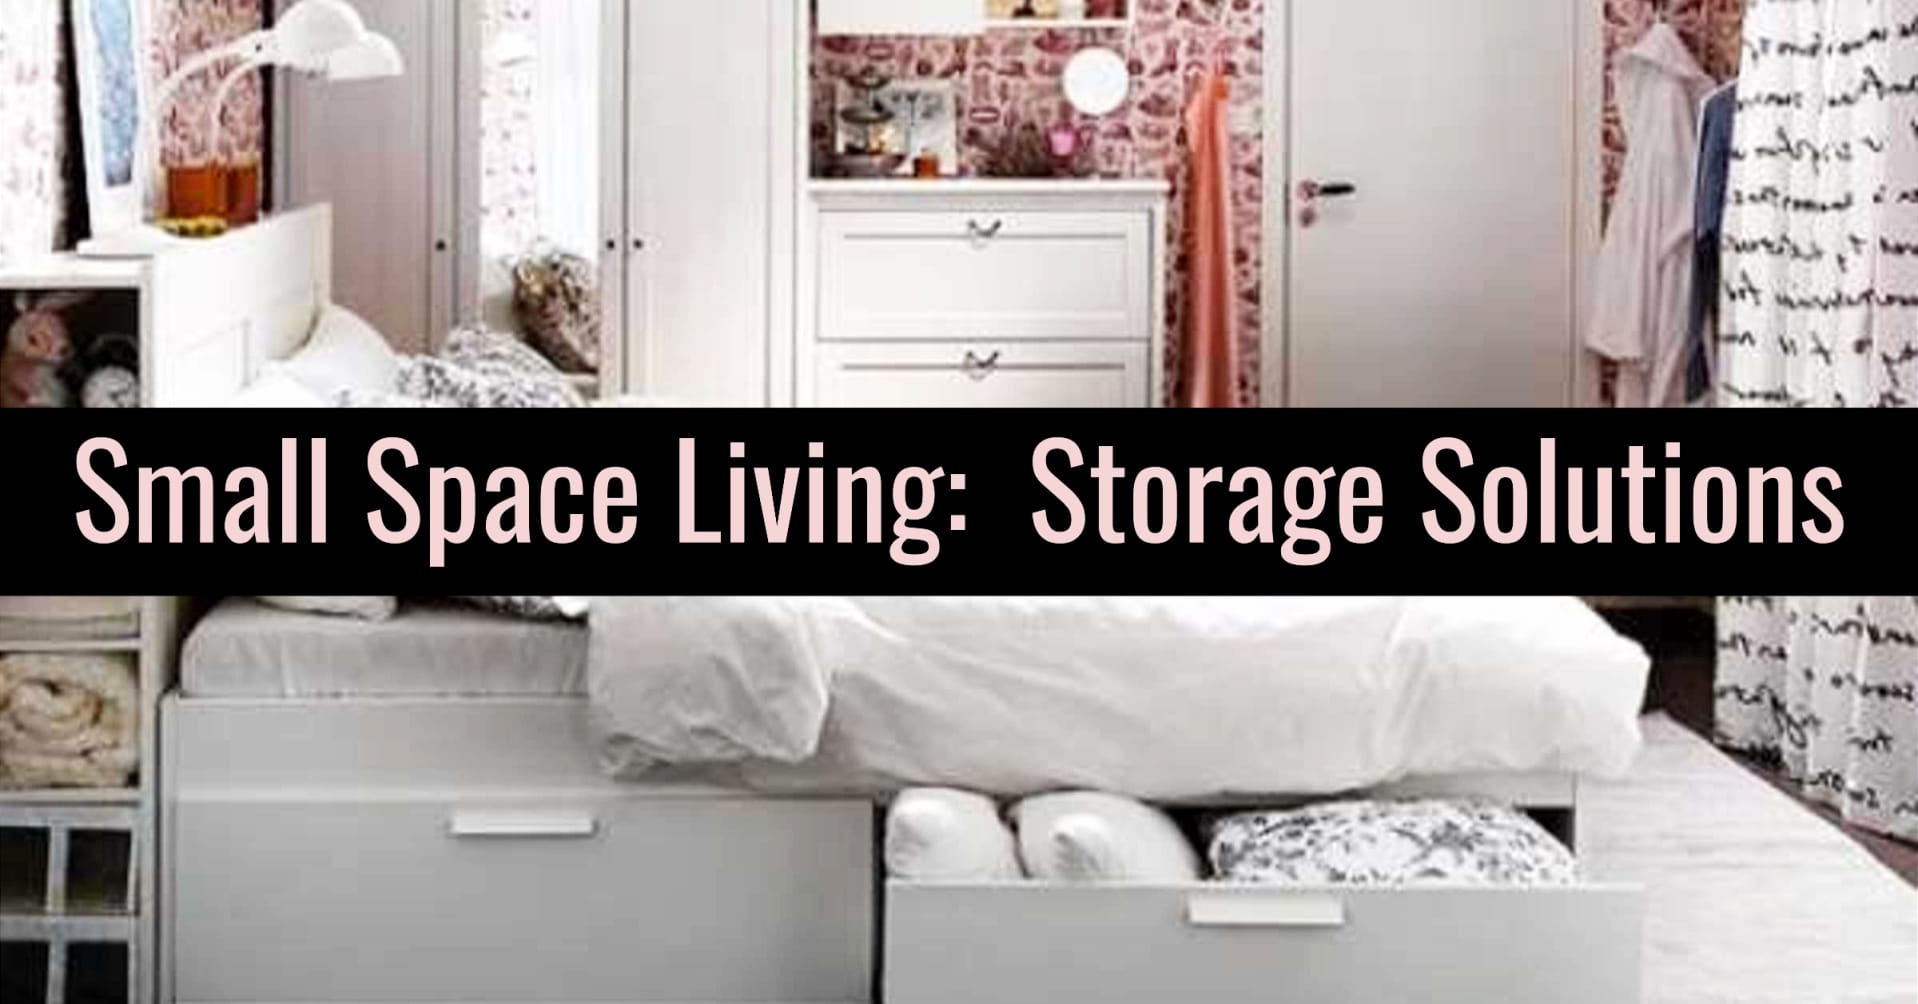 Small Space Living Storage Solutions!  Storage and organization hacks for getting organized at home on a budget - Get organized at home with these creative storage solutions for small spaces in your bedroom, tiny apartment, little flat, small kitchen, living room, bathroom and more for making the most of small spaces for serious clutter control.  Go from cluttered mess to organized success when uncluttering your home!